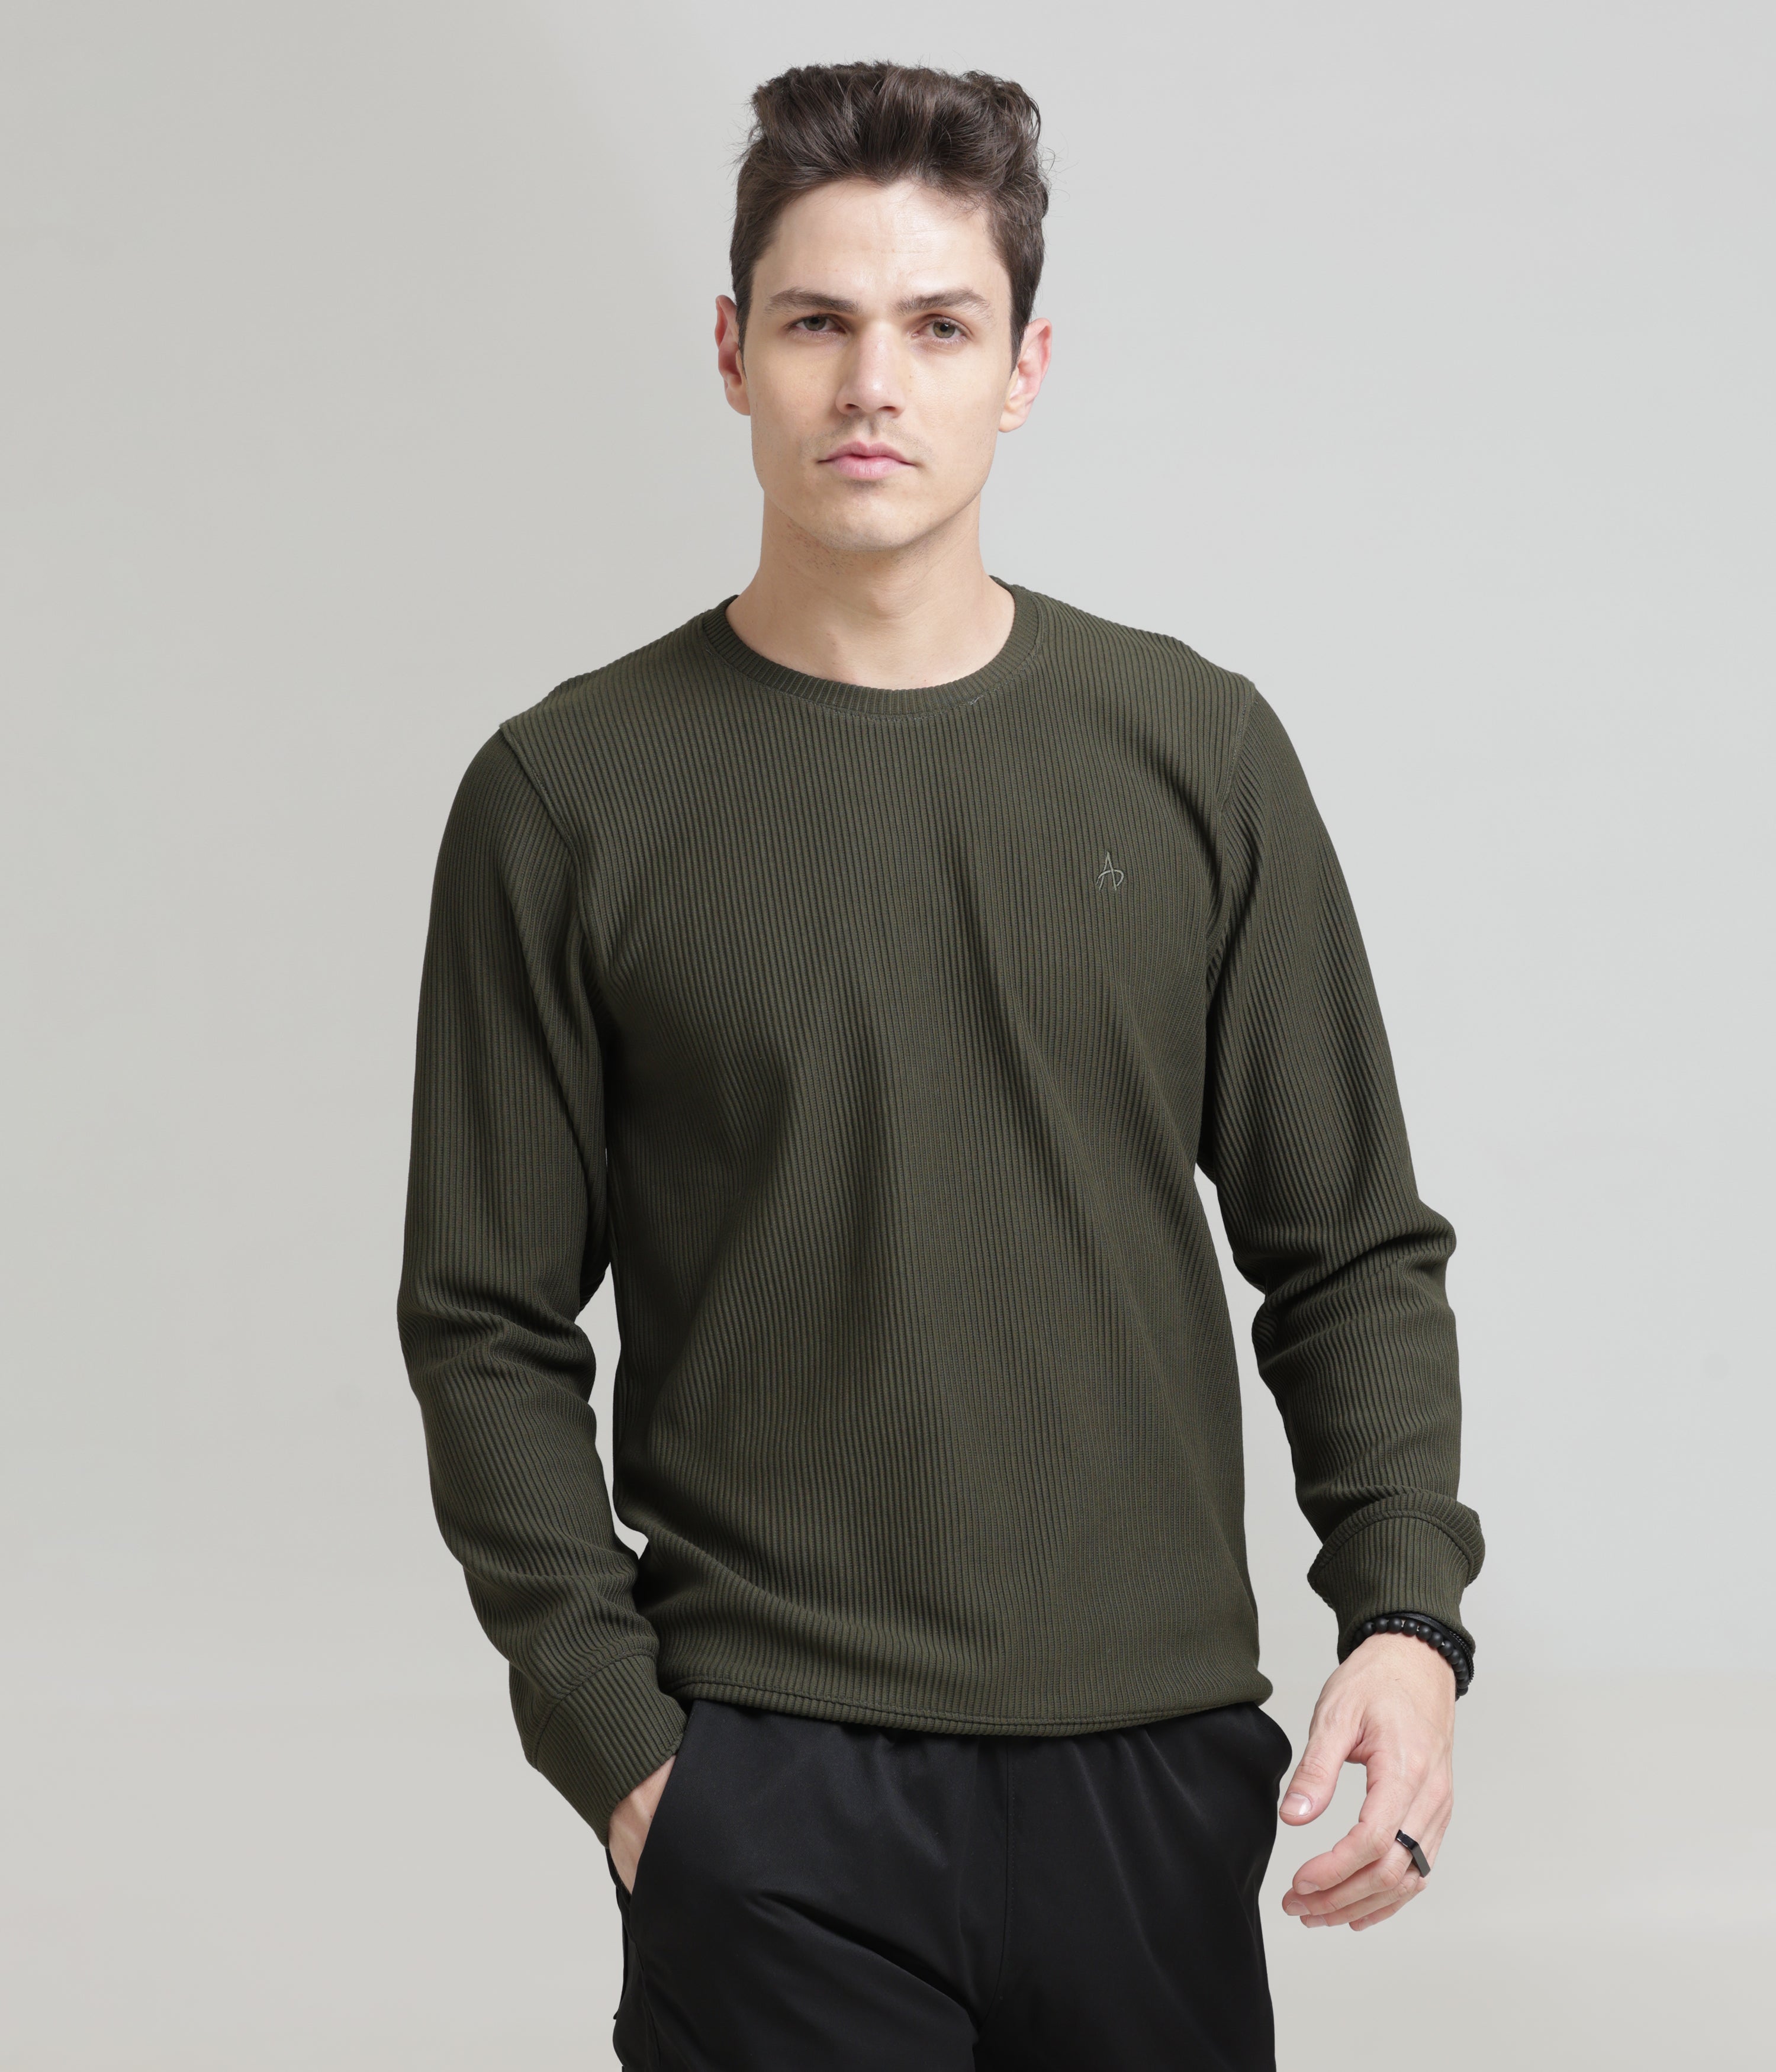 Green Regular Fit Sweatshirt: Casual Comfort for Chilly Days